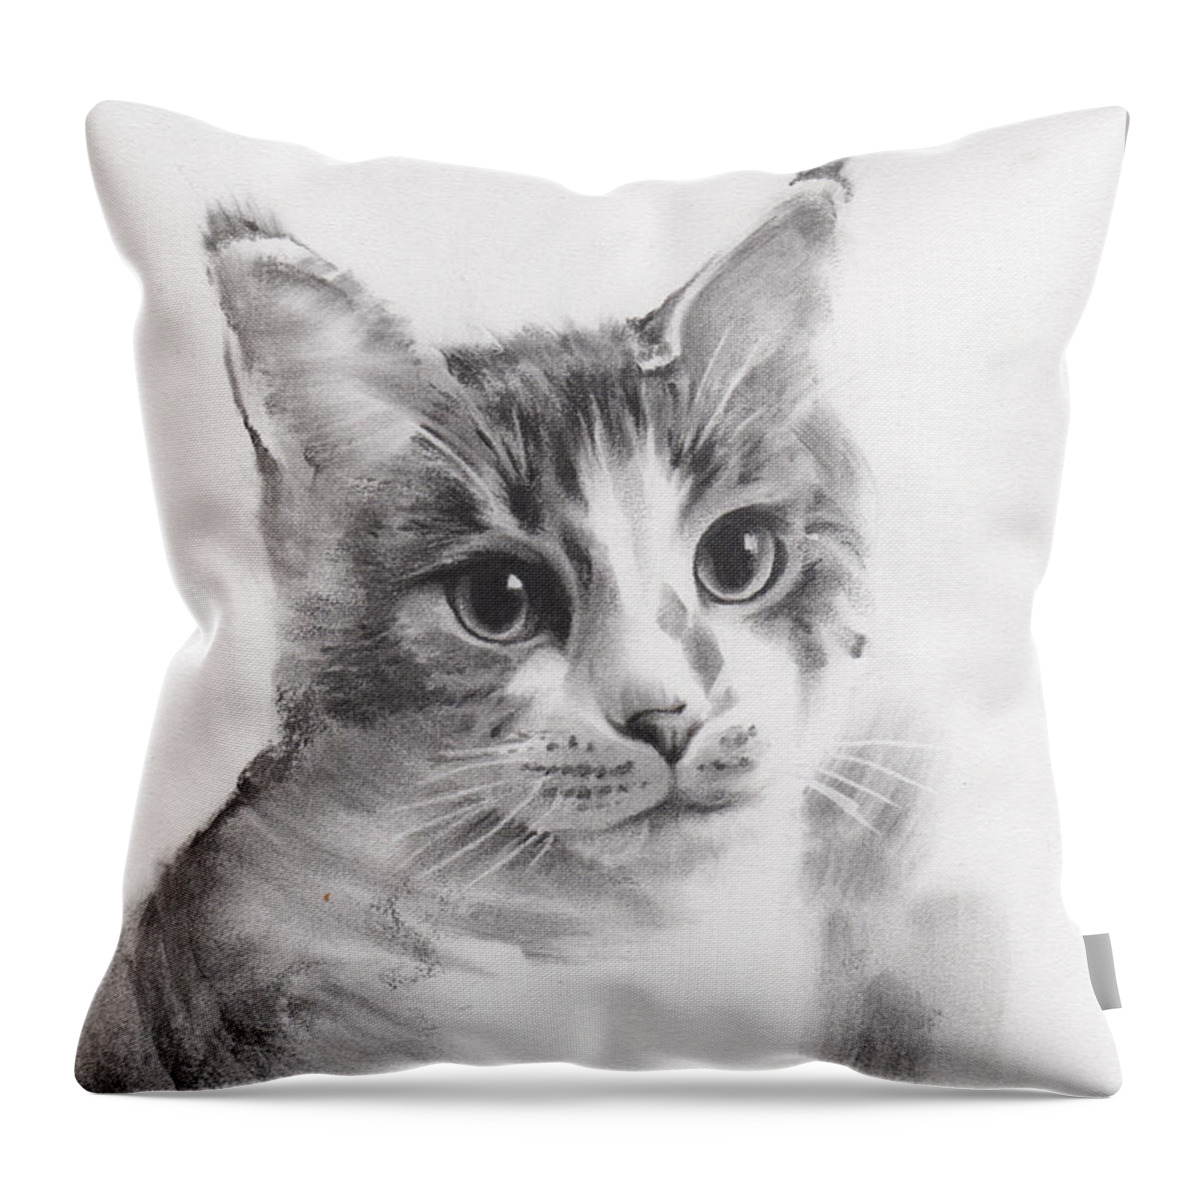 Figurative Throw Pillow featuring the drawing Abbie by Paul Davenport